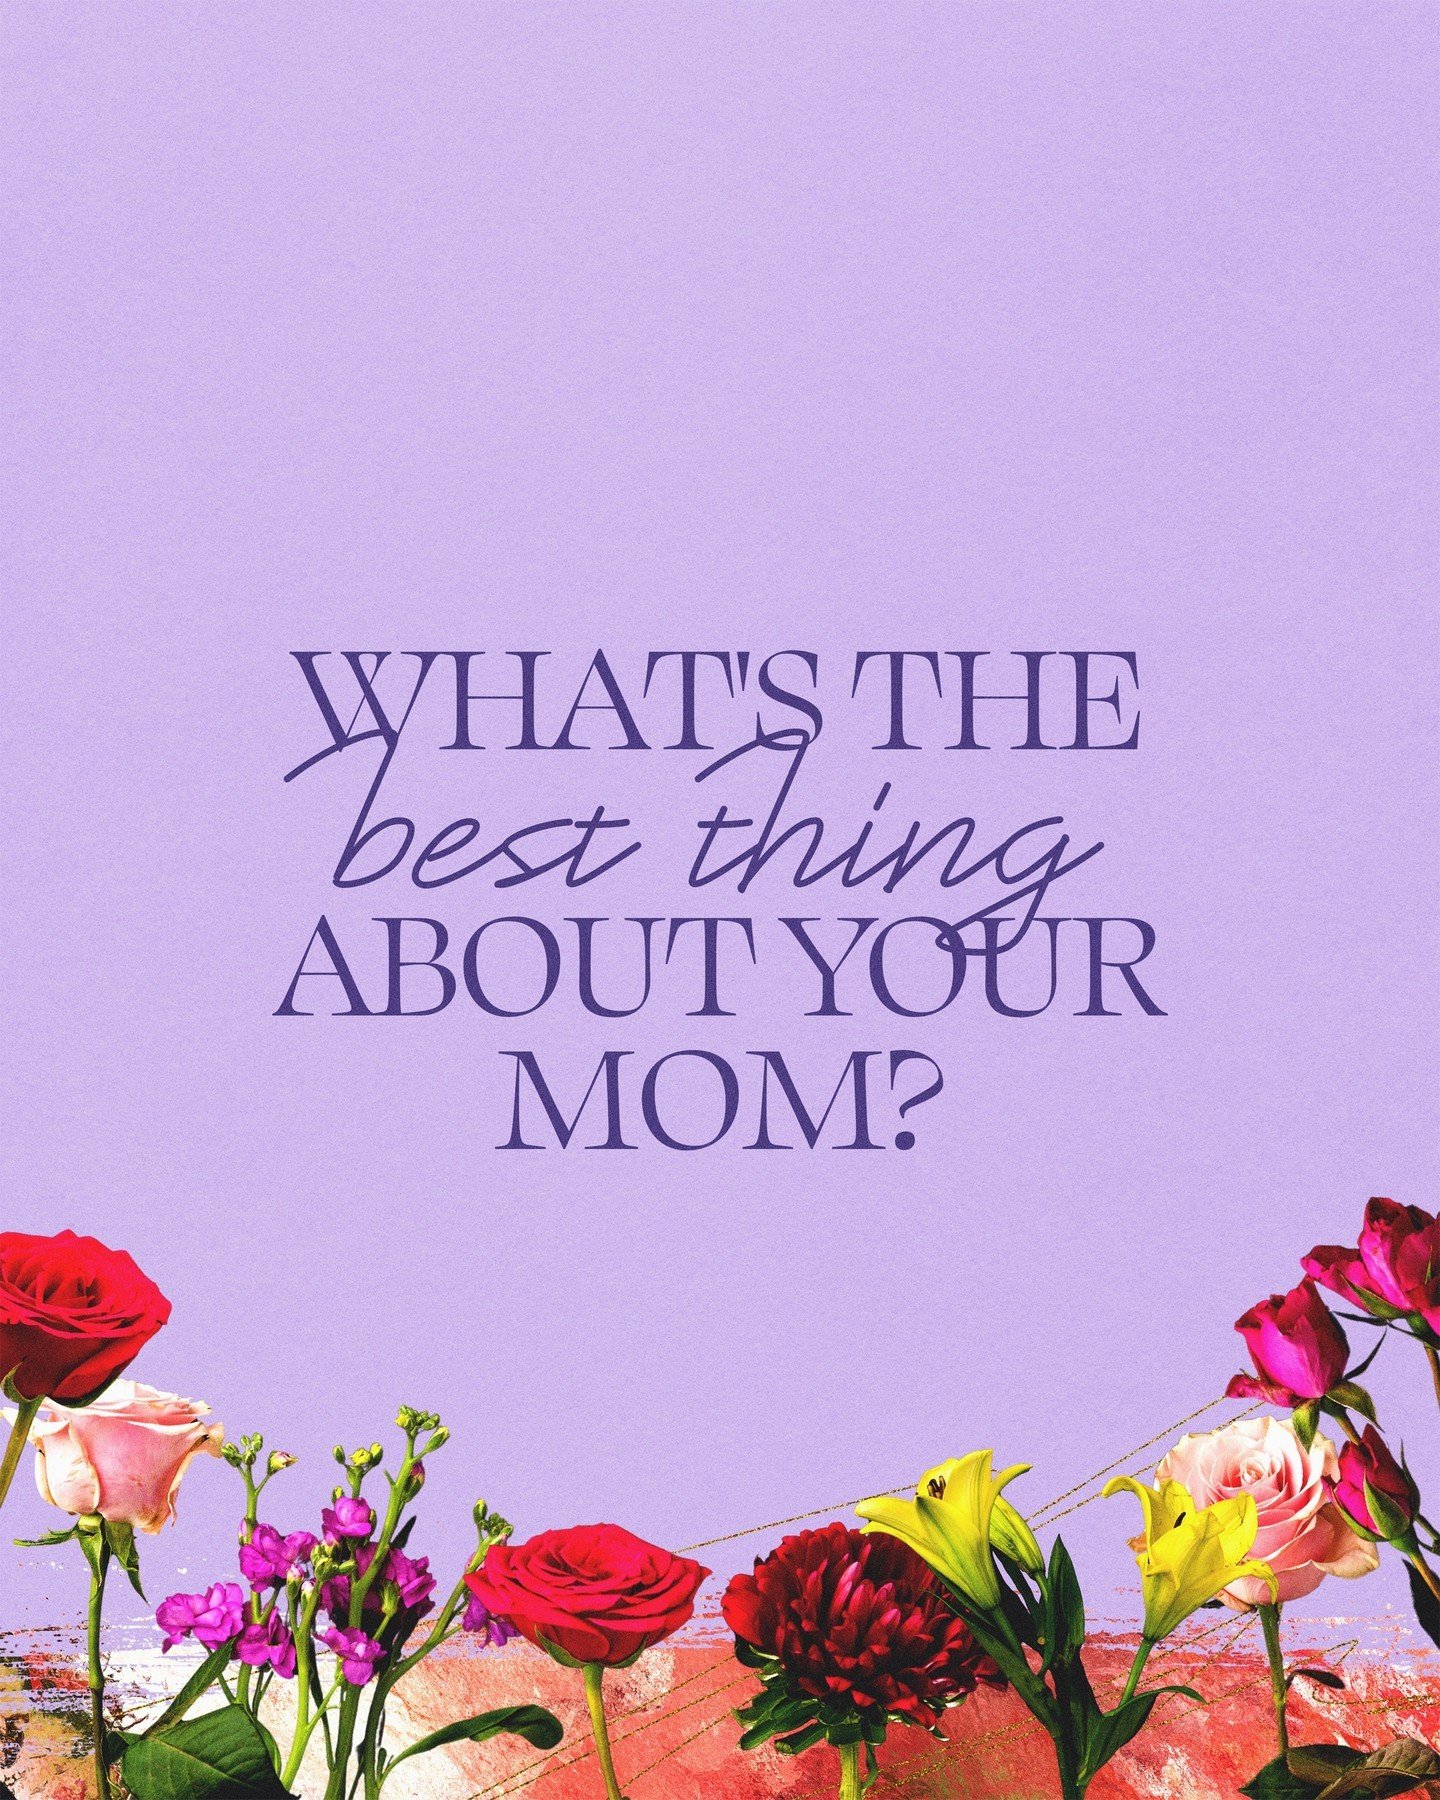 What's the best thing about your mom?
.
.
.
#church #god #morning #jesus #christ #love #christian #mama #mommy #mom #question